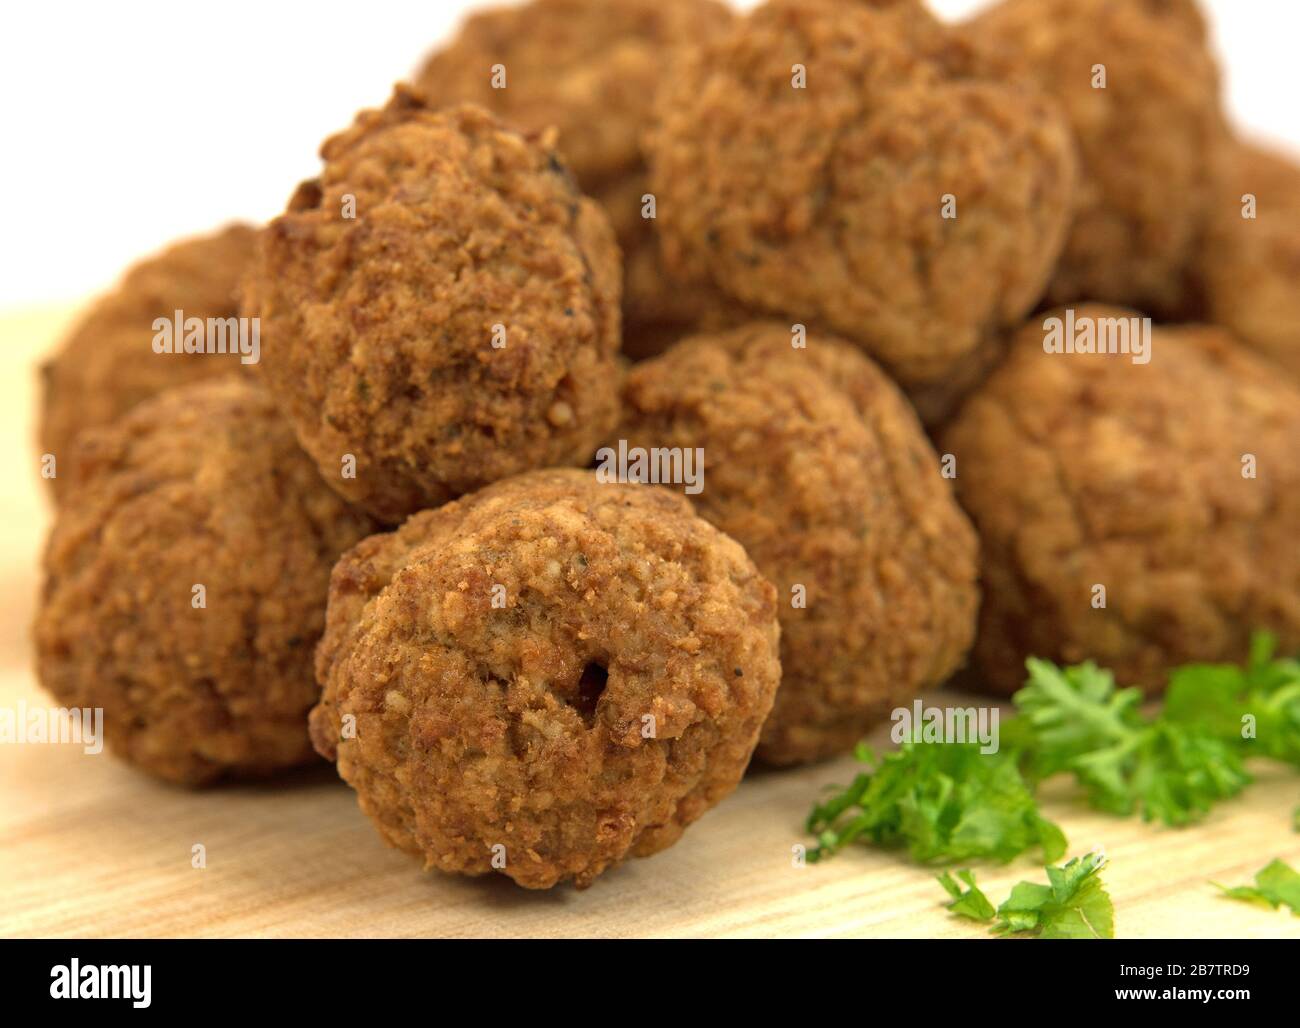 Fried meatballs on a wooden plate Stock Photo